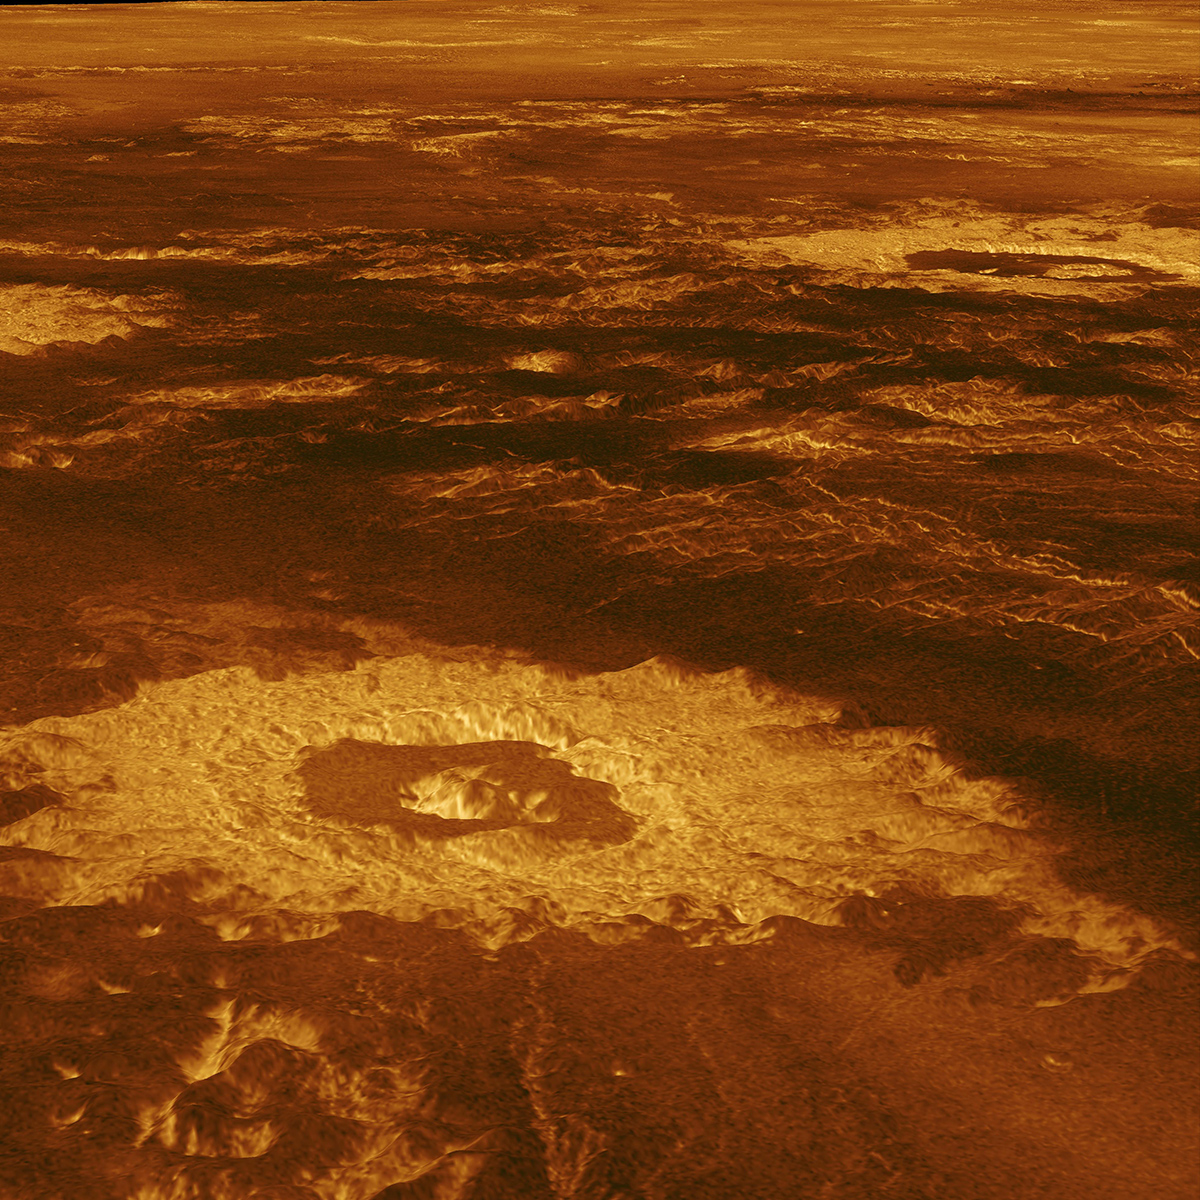 In a Magellan image dubbed the "Crater Farm" we see the curious layering of volcanic activity and impact craters.